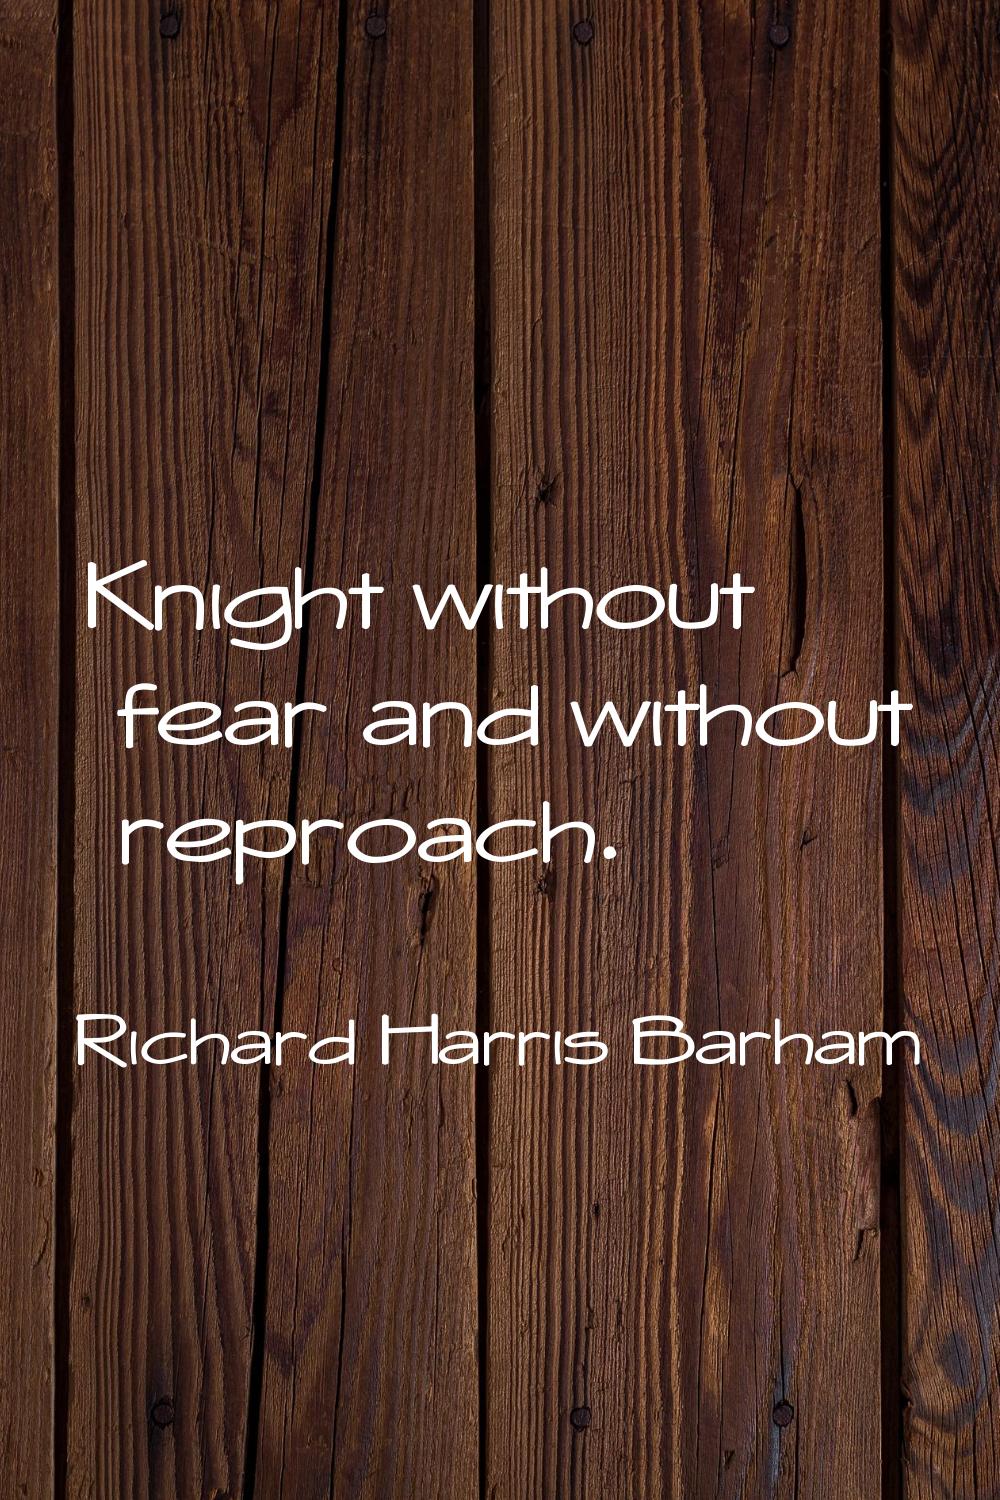 Knight without fear and without reproach.